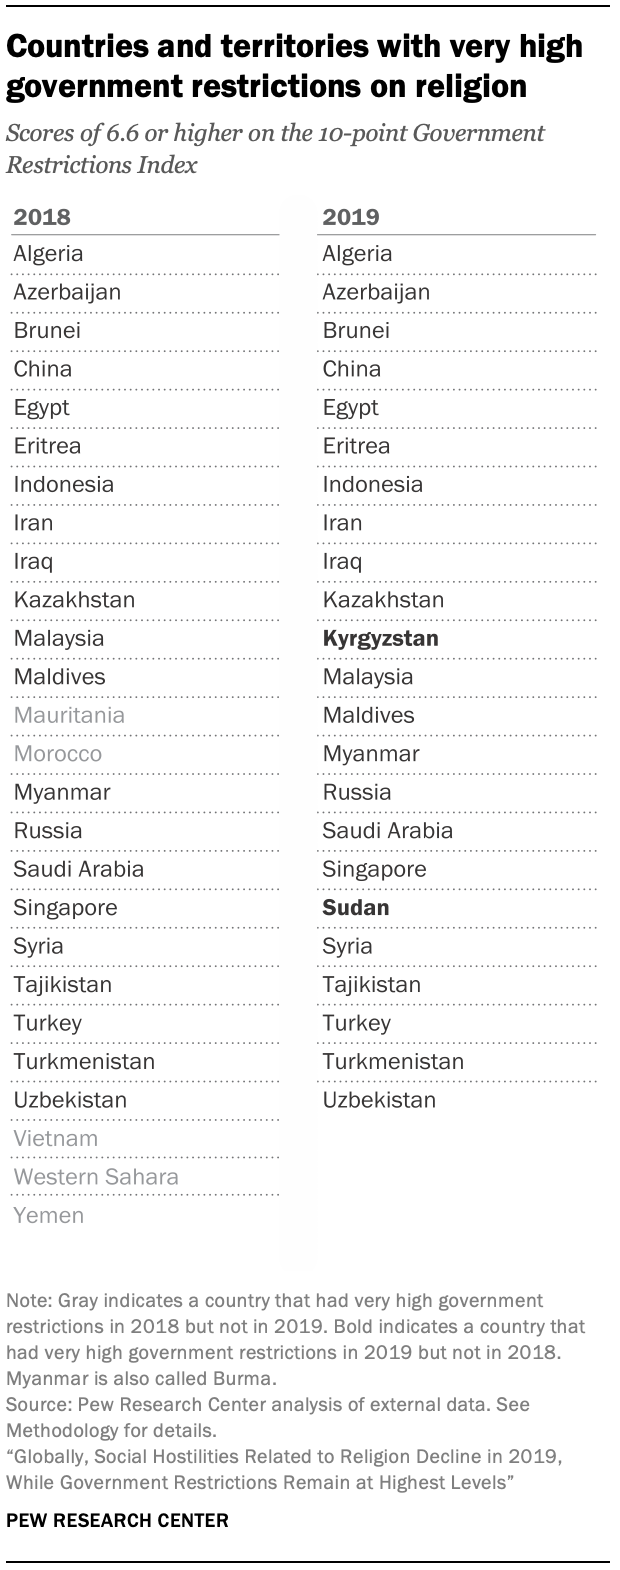 Countries and territories with very high government restrictions on religion